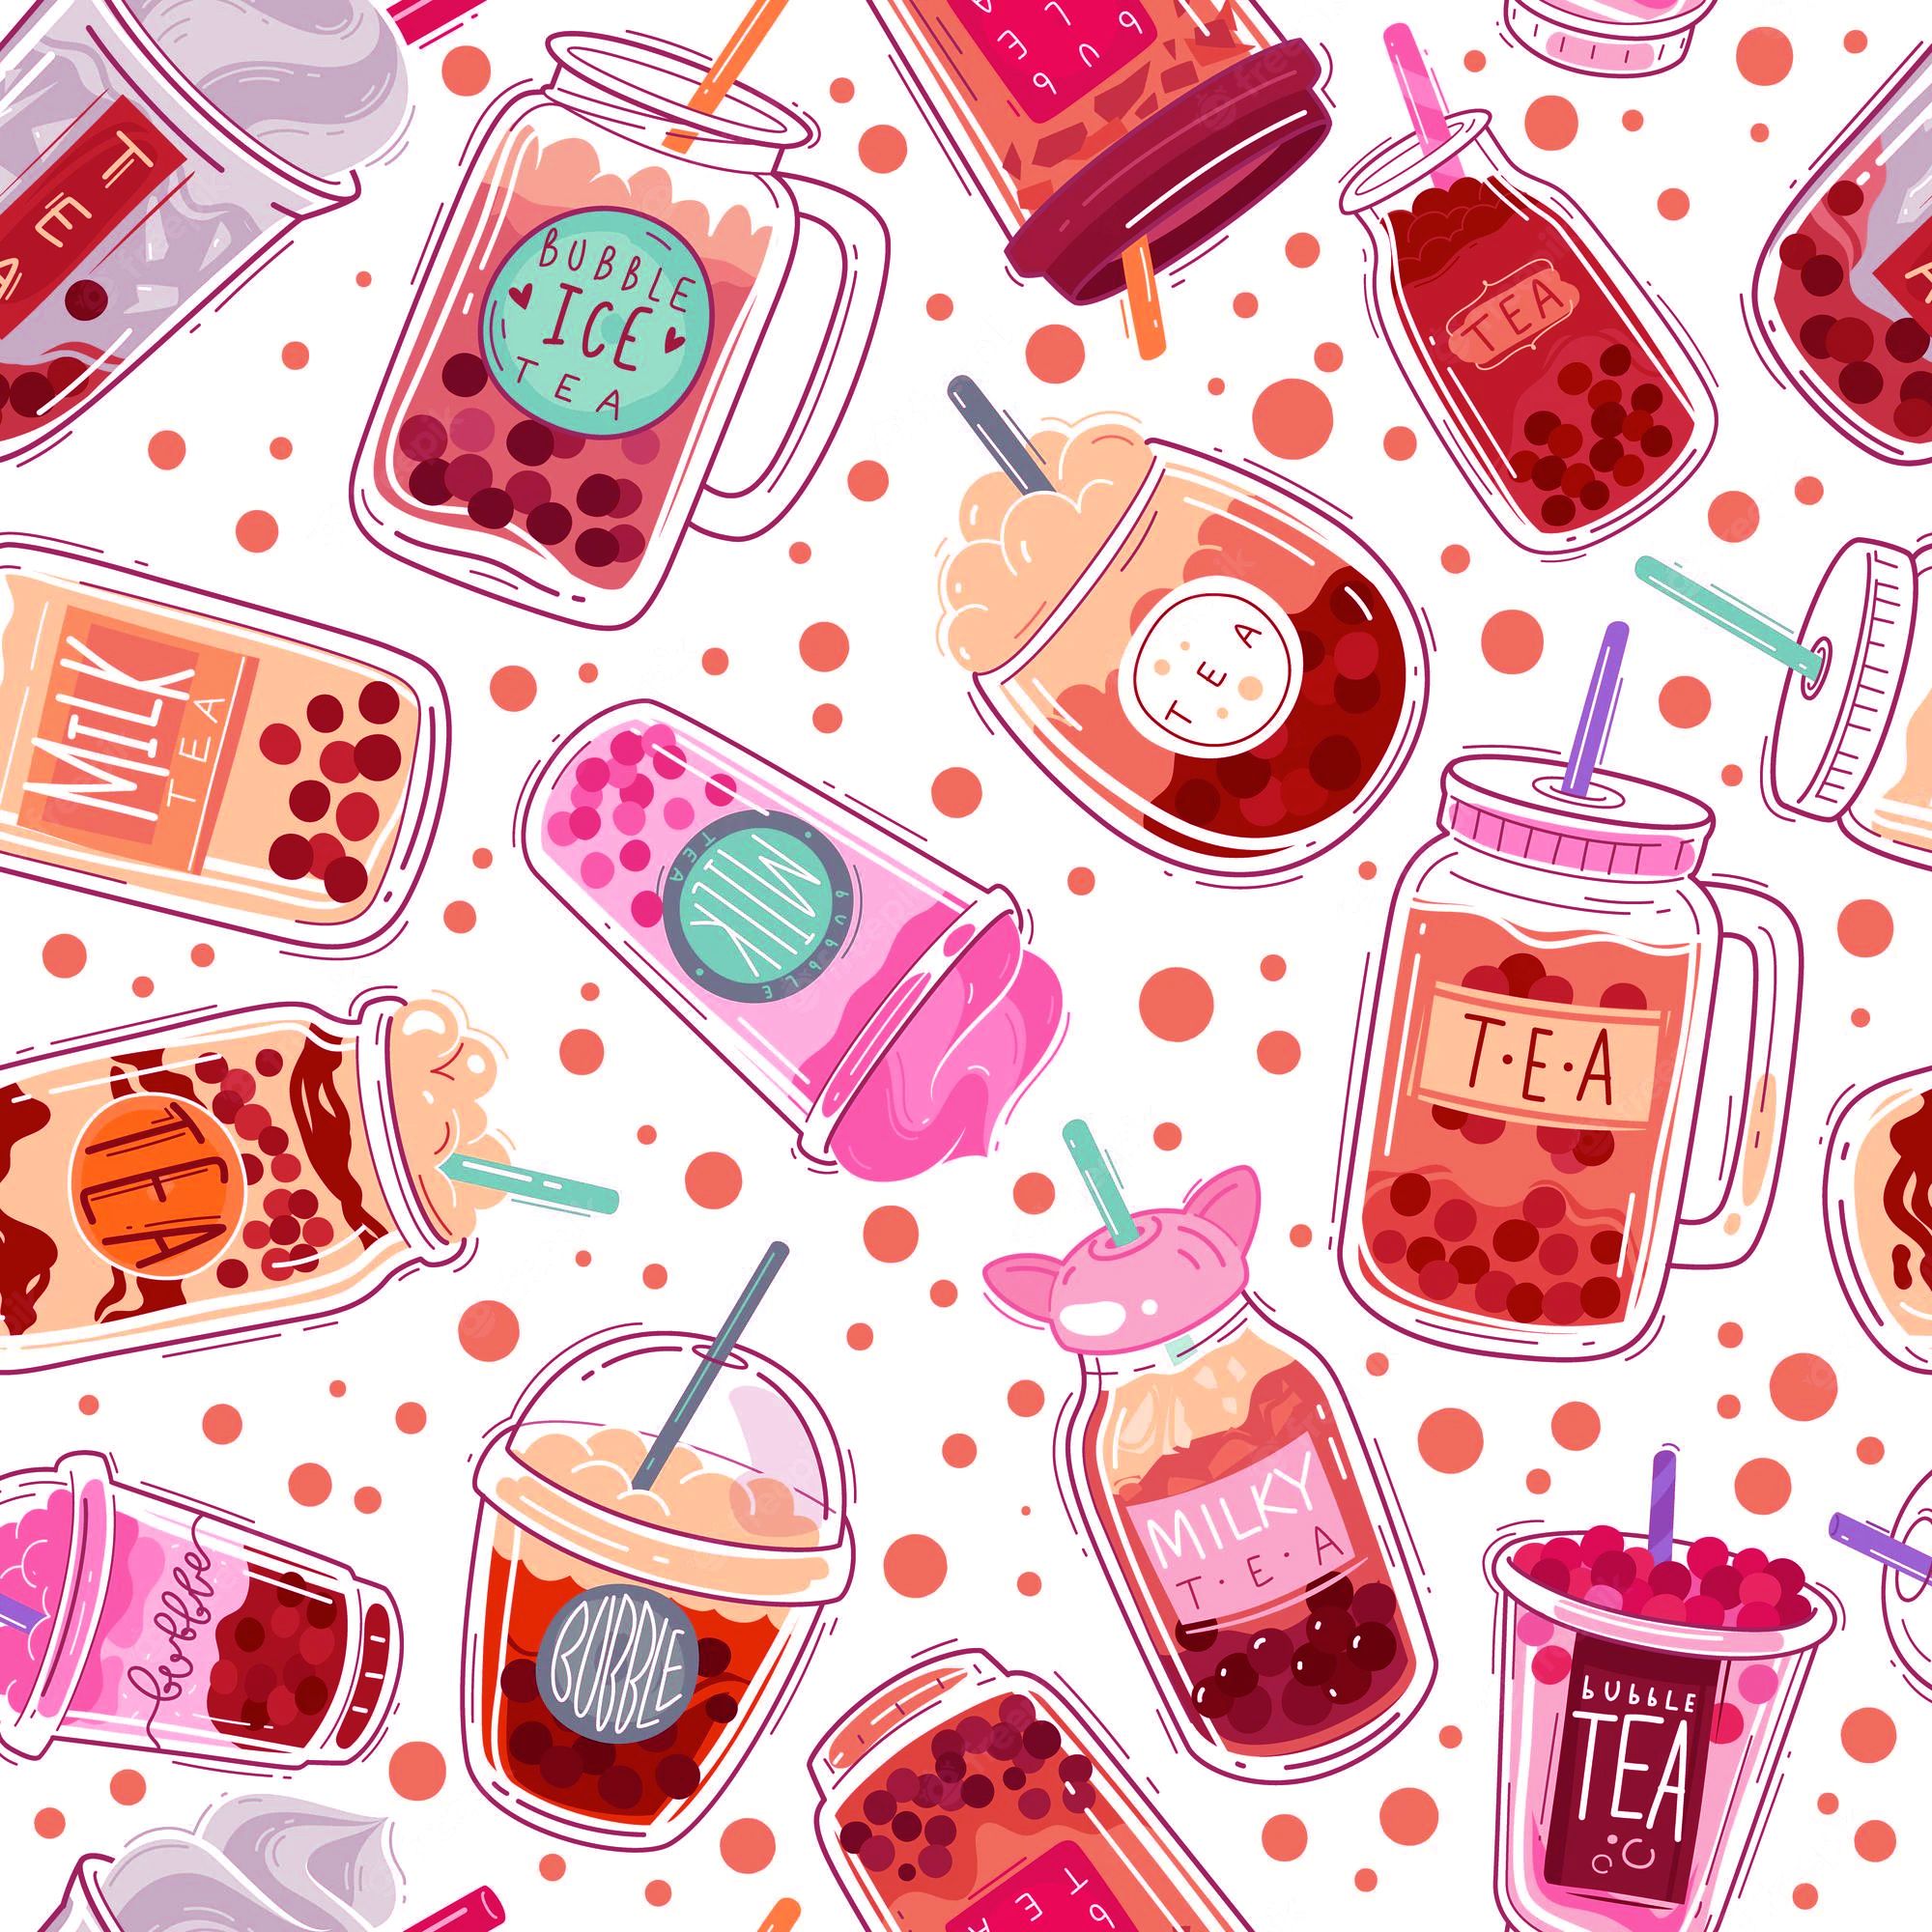 A pattern of various types of bubble tea - Boba